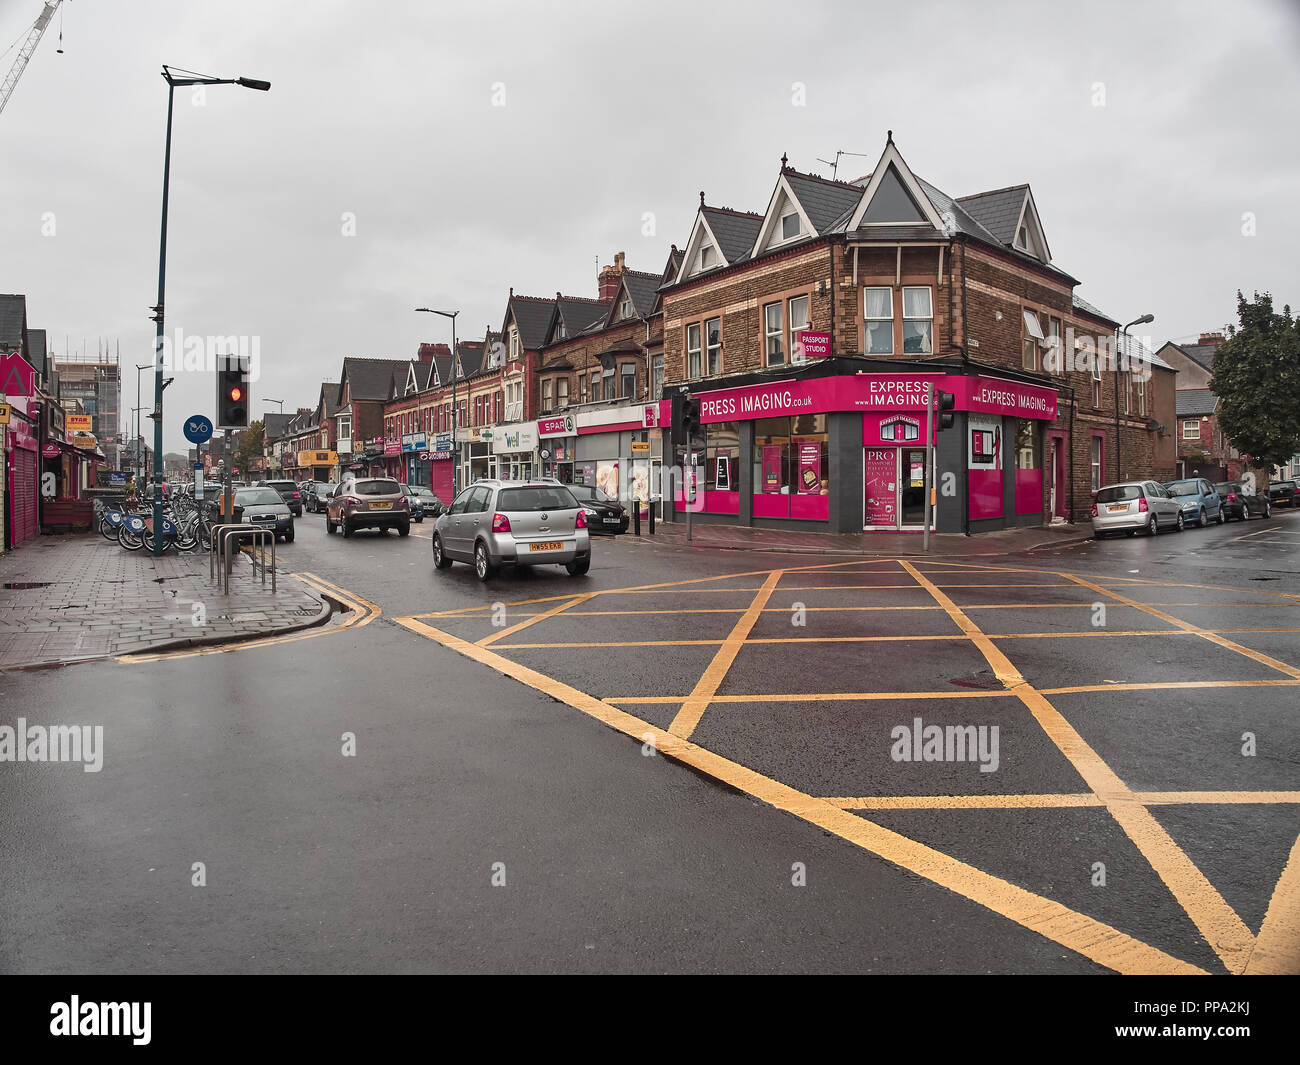 Cardiff, United Kingdom - Semptember 16, 2018: View of Cardiff city streets Stock Photo